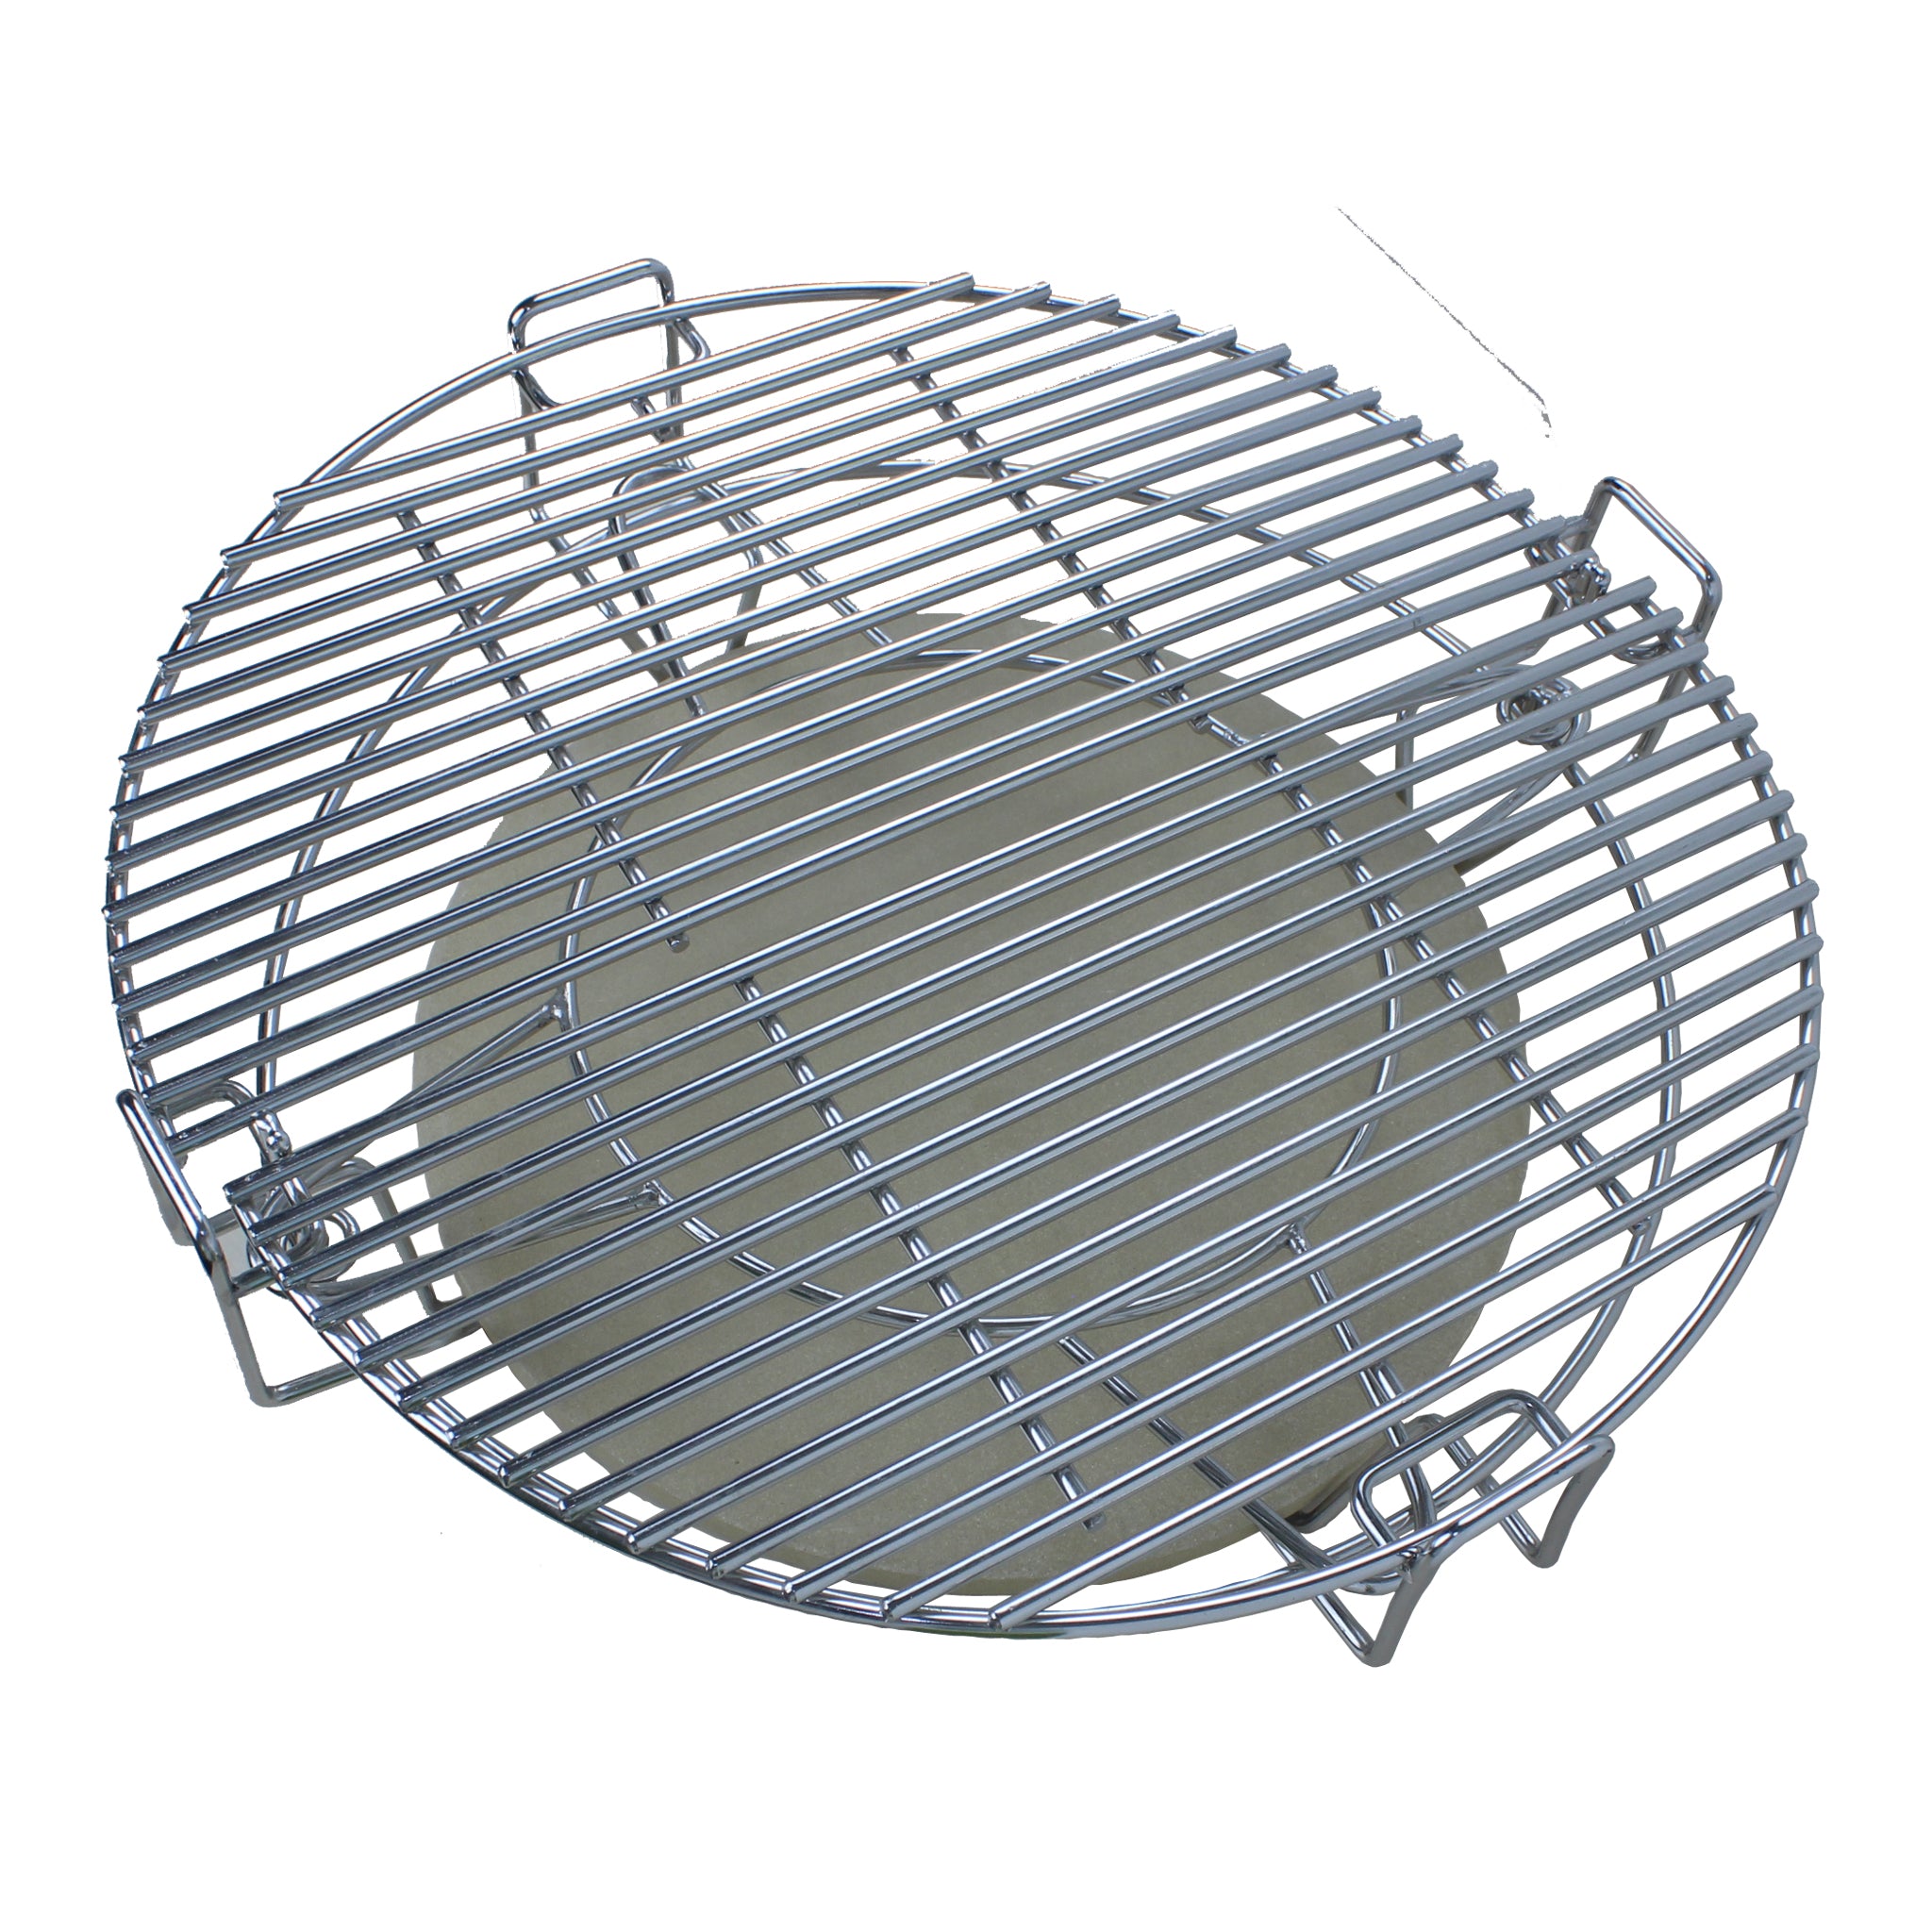 Kamado Divide & Conquer Cooking System for 18" Grill